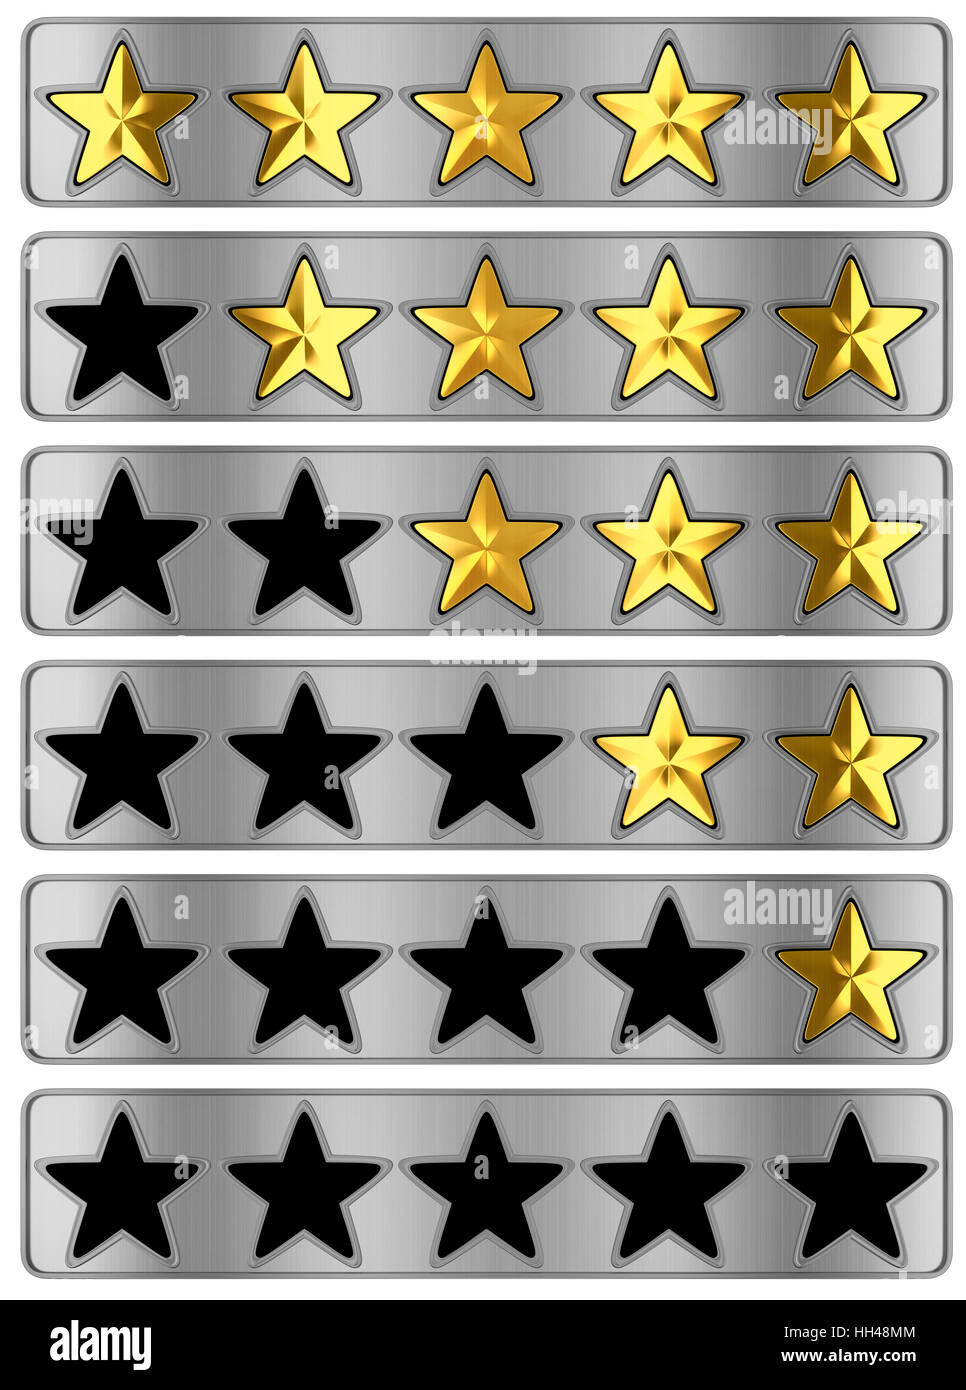 Gold Star Chart For Adults